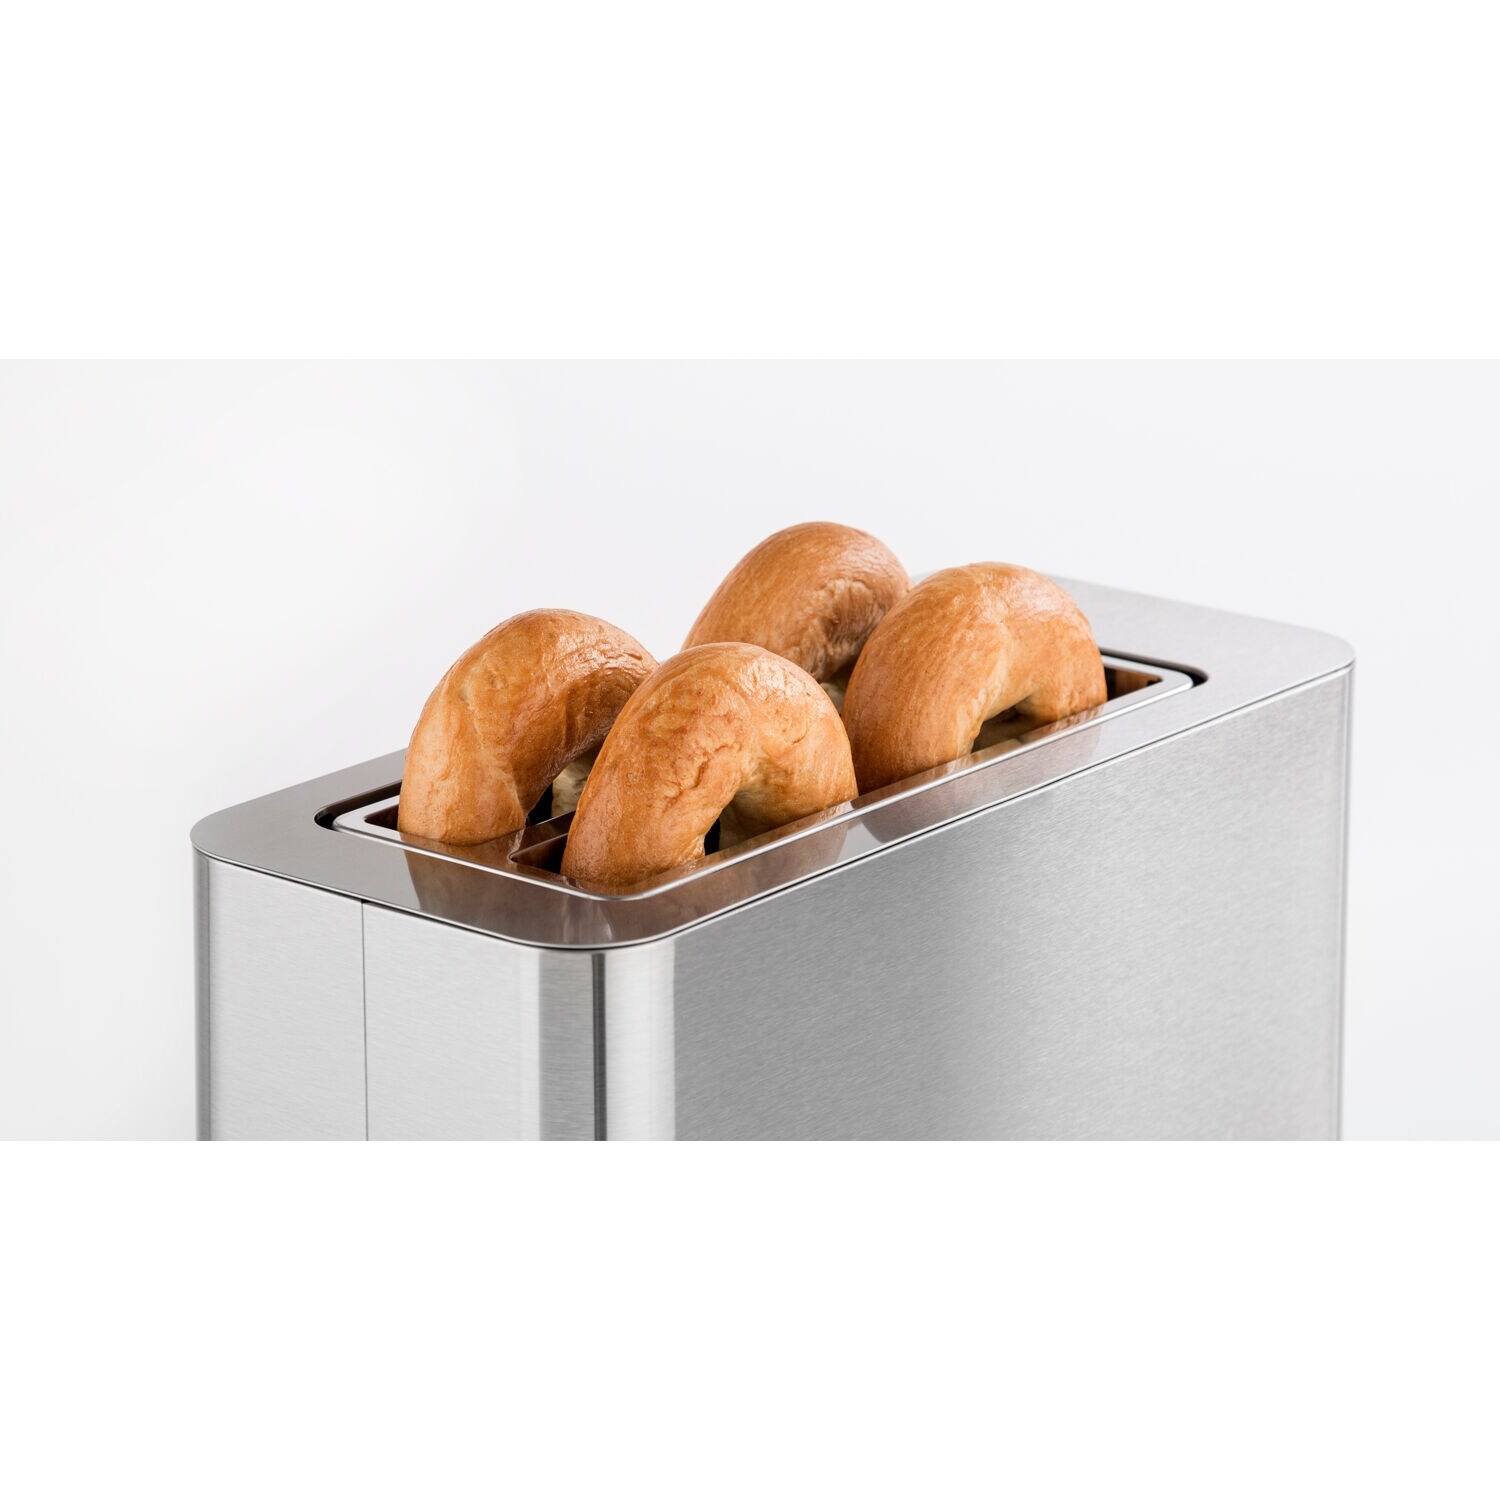 https://ak1.ostkcdn.com/images/products/is/images/direct/0d598a15a5c4031099c53414c6fba7737122a51e/Four-Slice-Wide-Slot-Toaster%2C-Stainless-Steel.jpg